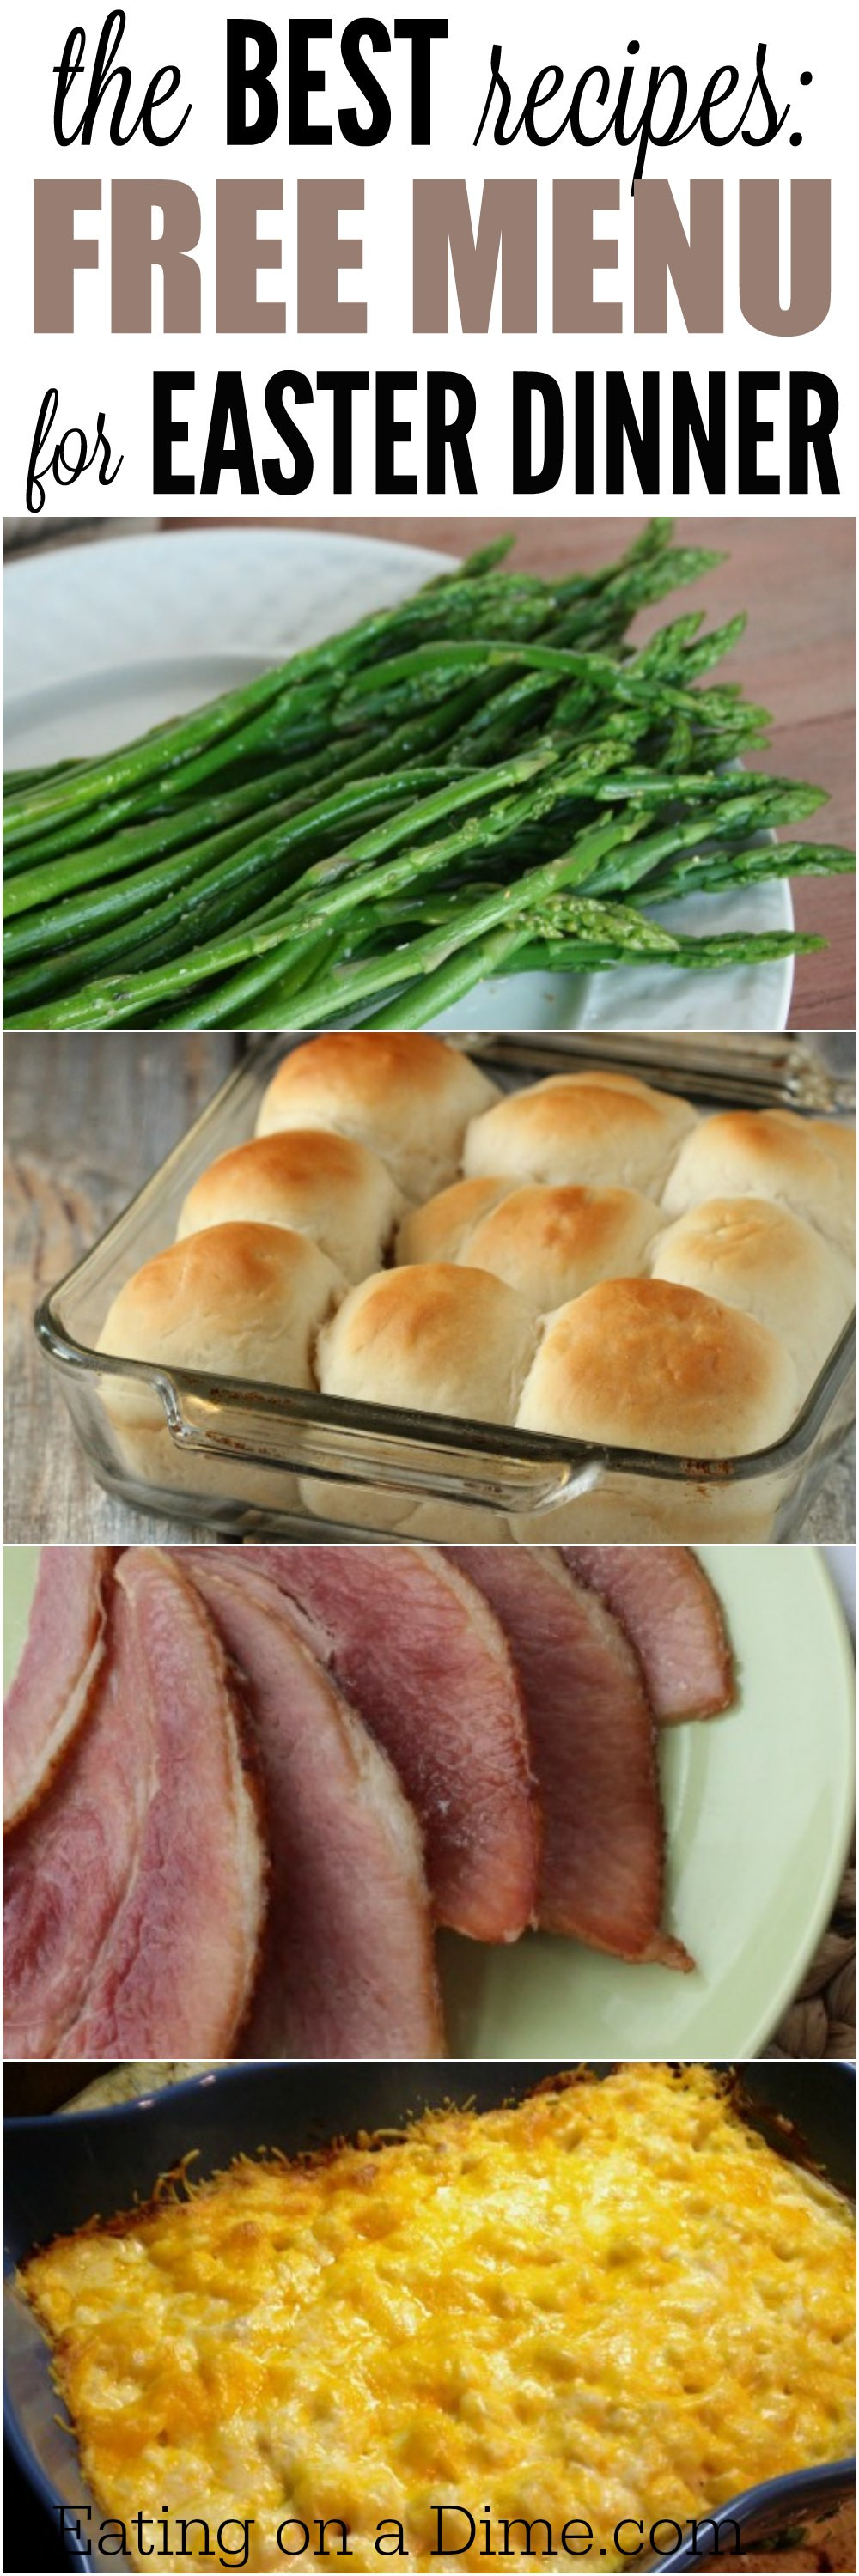 Easter Dinner Menu Ideas And Recipes
 Easter Menu Ideas and Recipes The Best Easter Dinner recipes